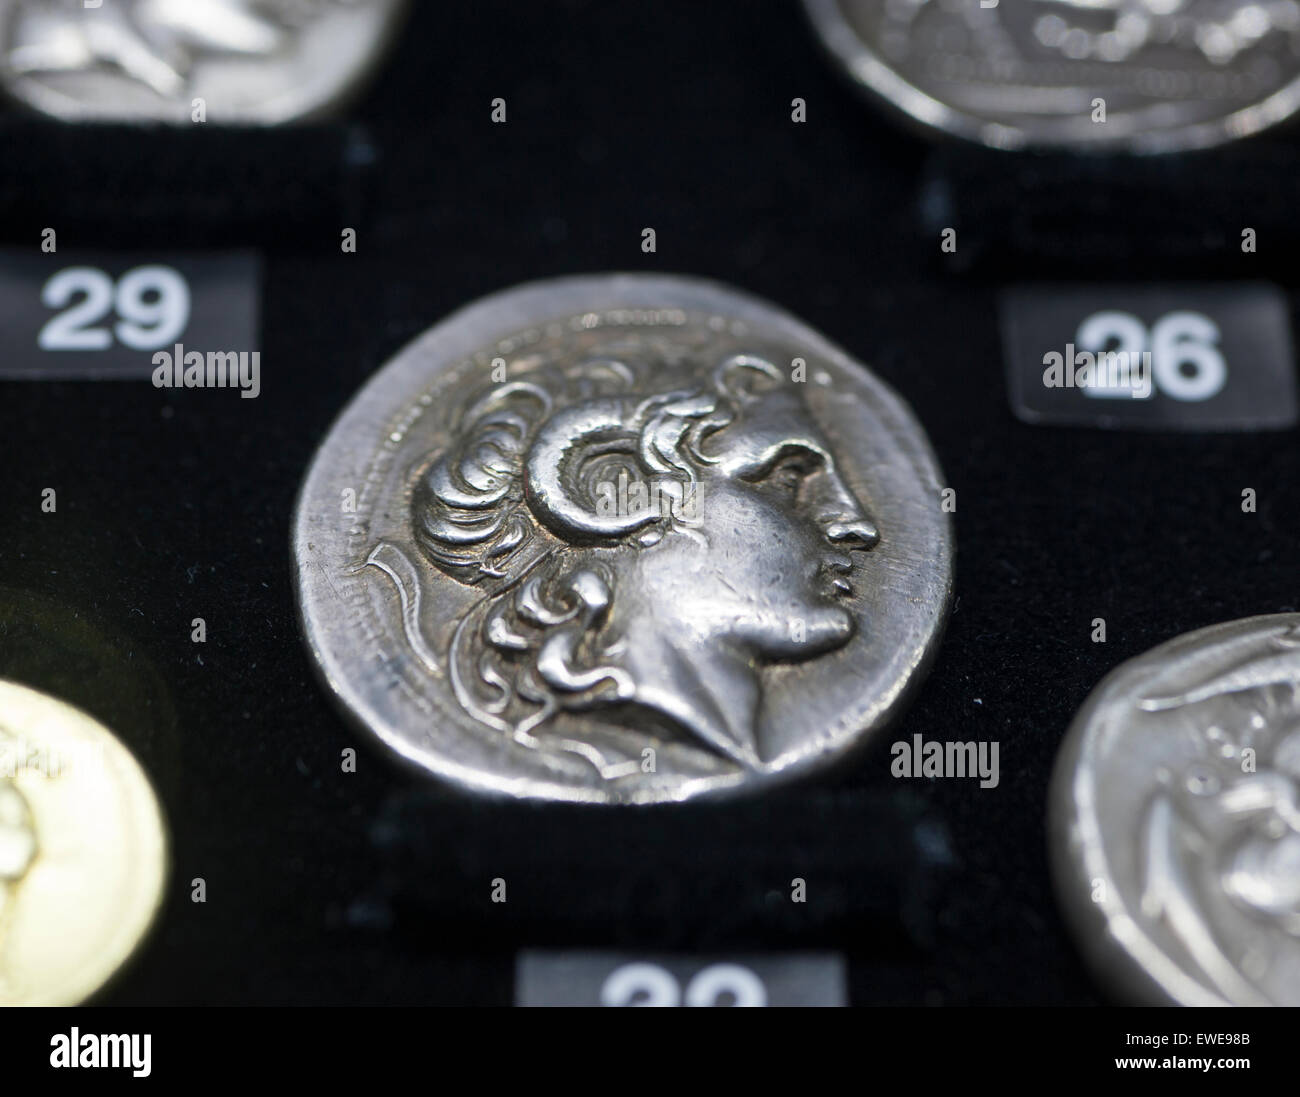 Royal Hospital Chelsea, London UK. 24th June 2015. Masterpiece 2015, the summer’s leading international art, antiques and design fair, opens from 25th June till 1st July. Rare Alexander the Great coin on the Baldwin’s Stanley Gibbons stand. Credit:  Malcolm Park editorial/Alamy Live News Stock Photo